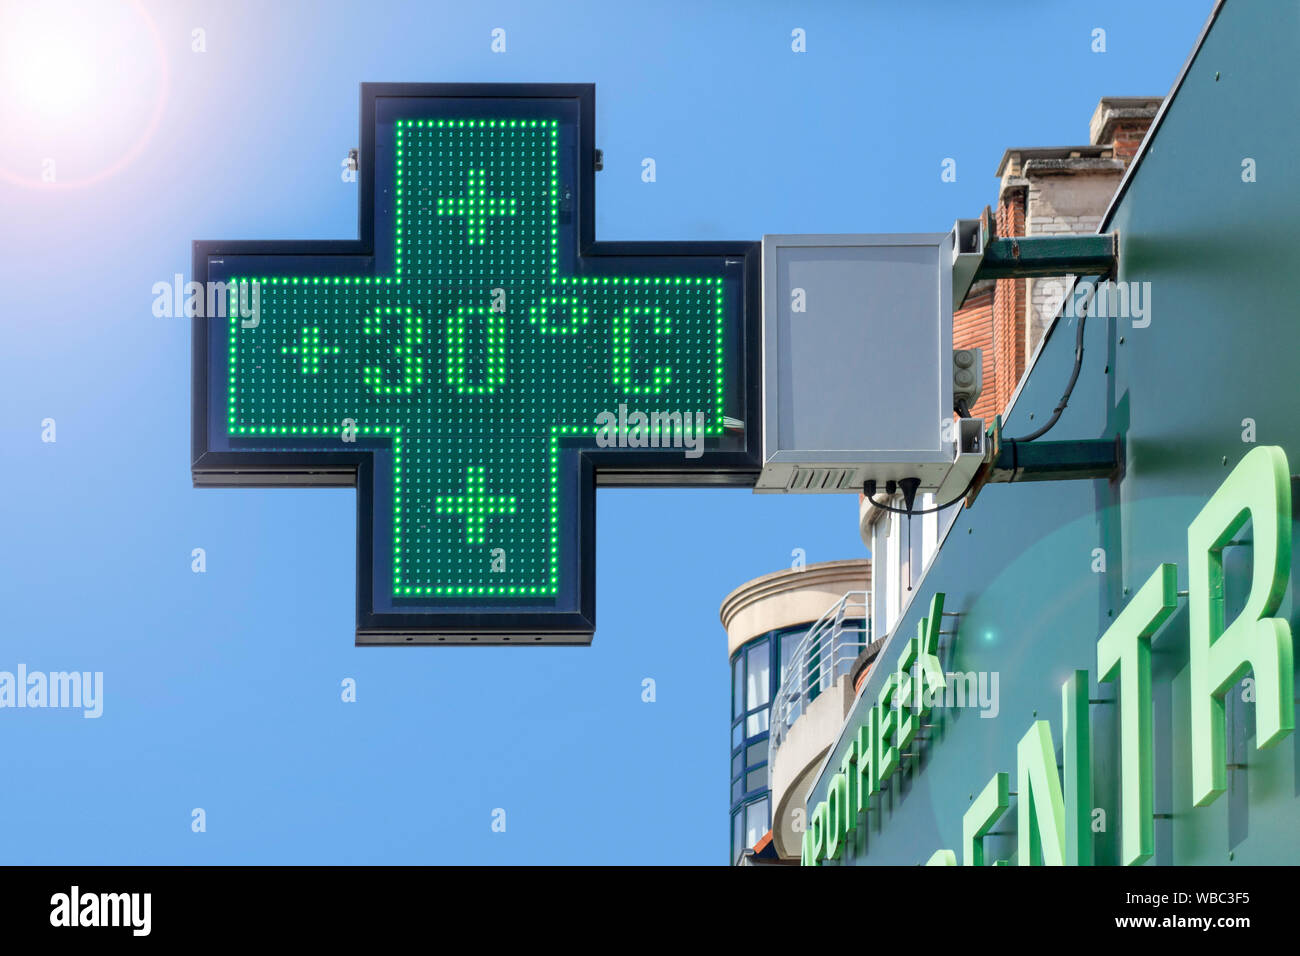 Thermometer in green pharmacy screen sign displays extremely hot temperature of 30 degrees Celsius / 30°C / 30°C during summer heatwave / heat wave Stock Photo